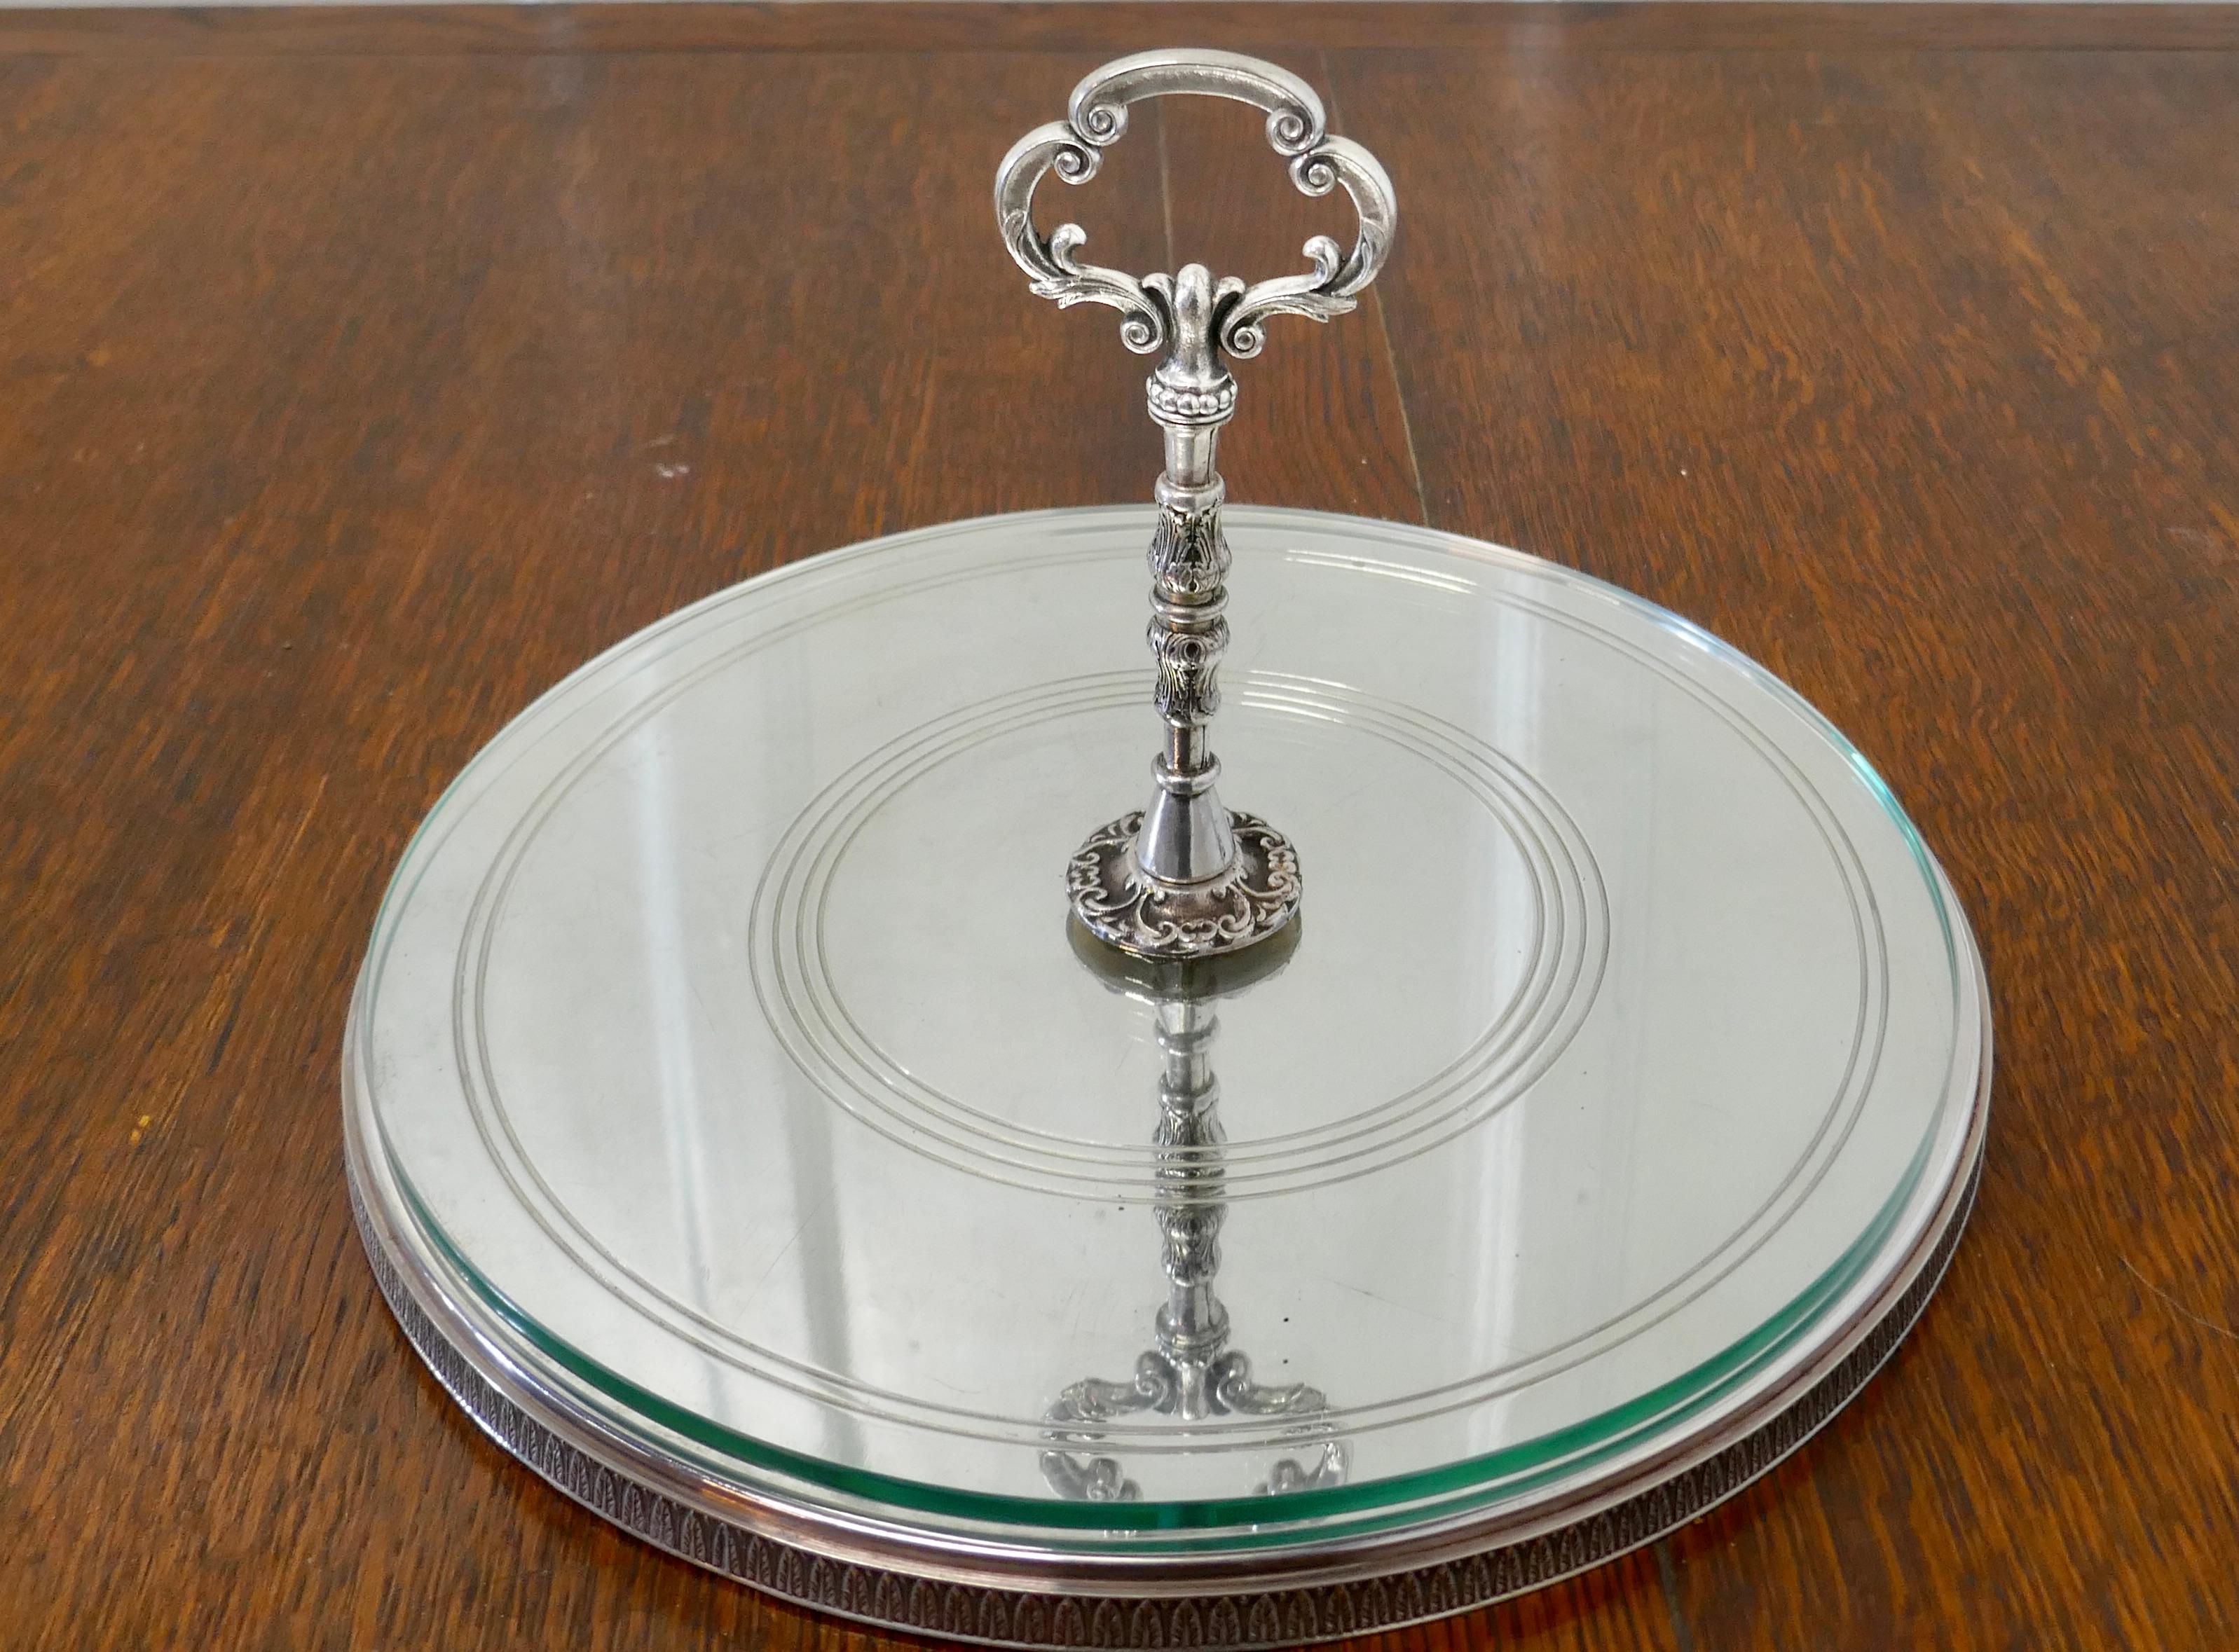 French silver plated and glass cake stand

A pretty sliver plated stand with a central handle, the stand has a glass cover which sits on the decorative base giving the illusion of the bottom being in mirror 
The stand is in good used condition it